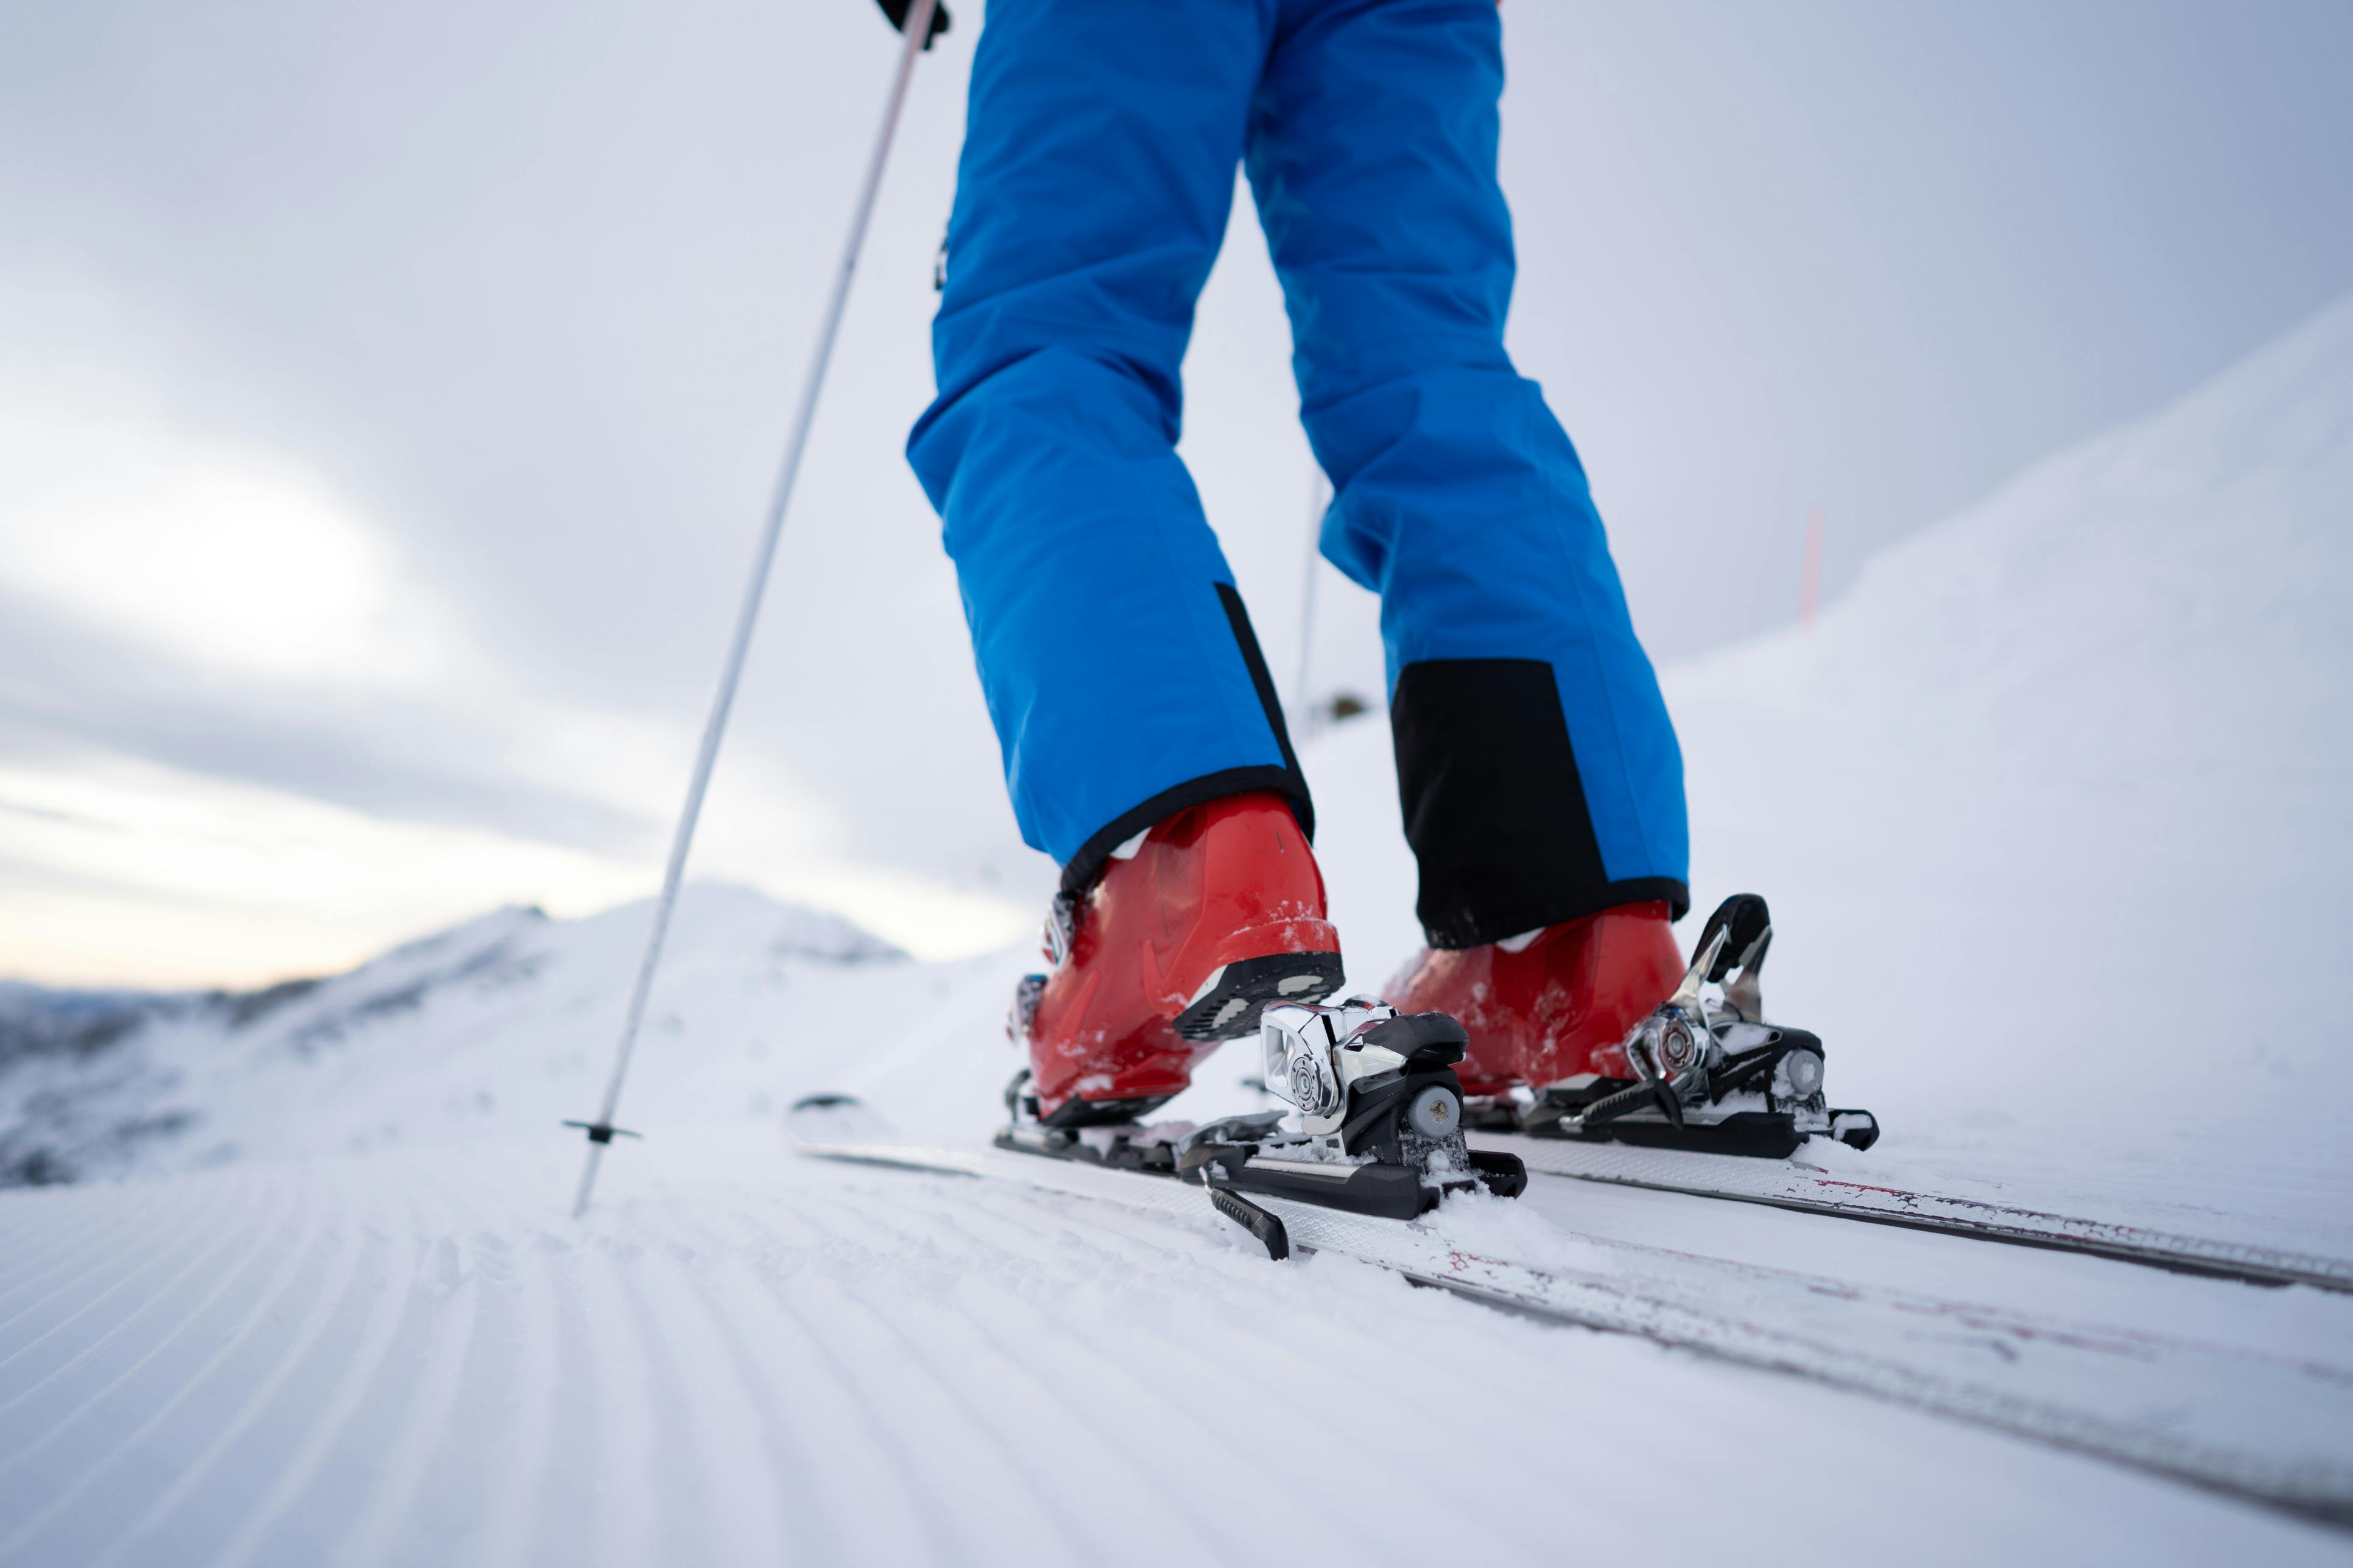 A person wearing blue ski pants and red ski boots steps into their binding